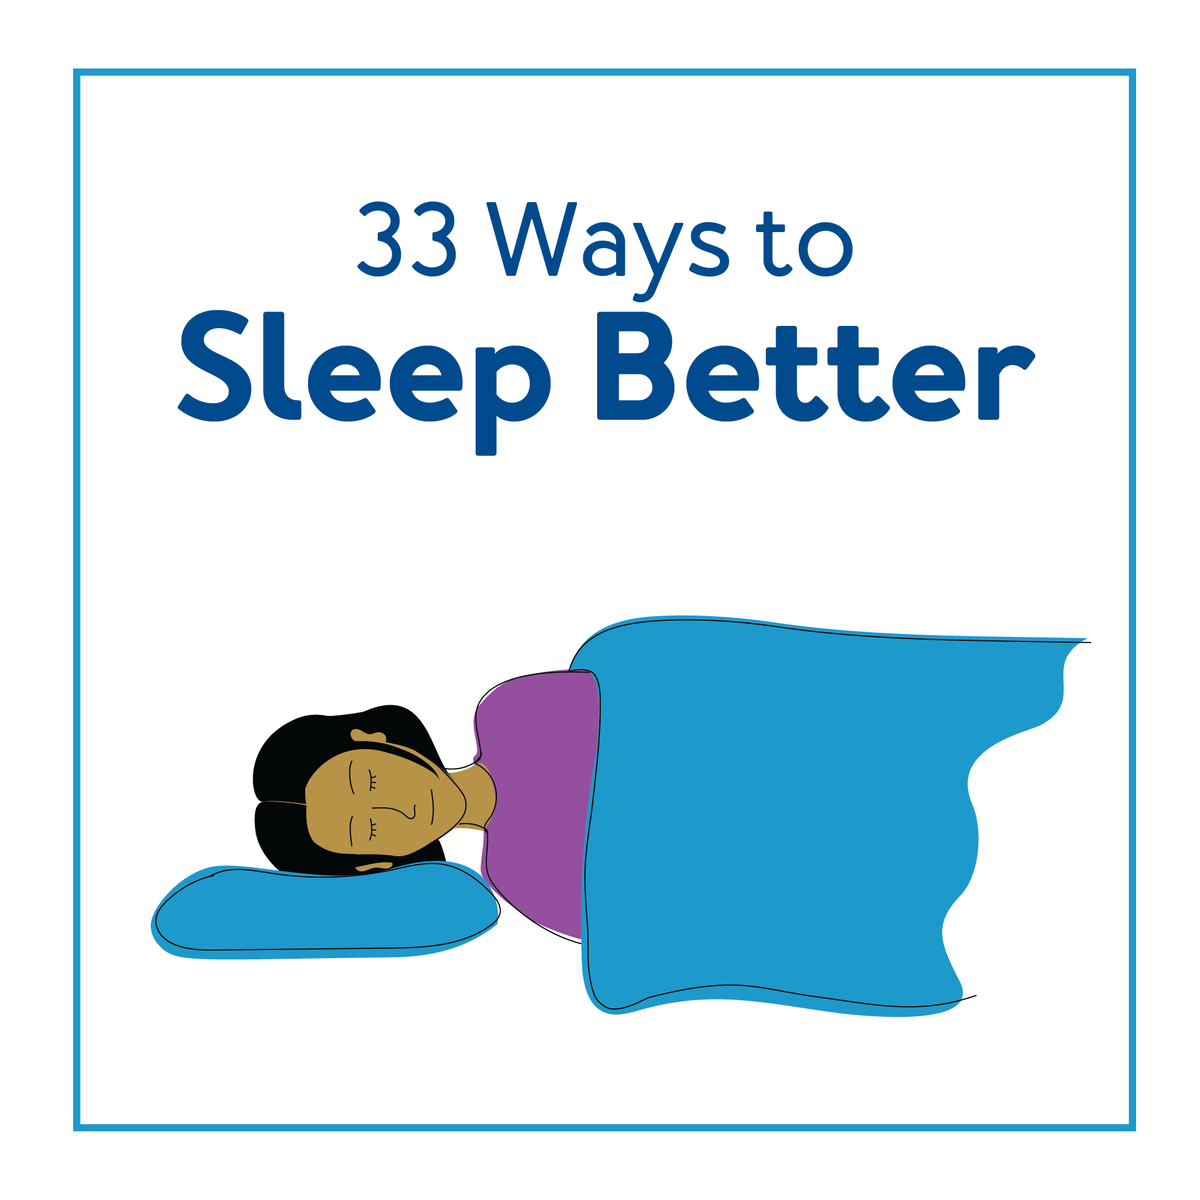 A cover image of a cartoon person sleeping. Text, 33 Ways to Sleep Better.